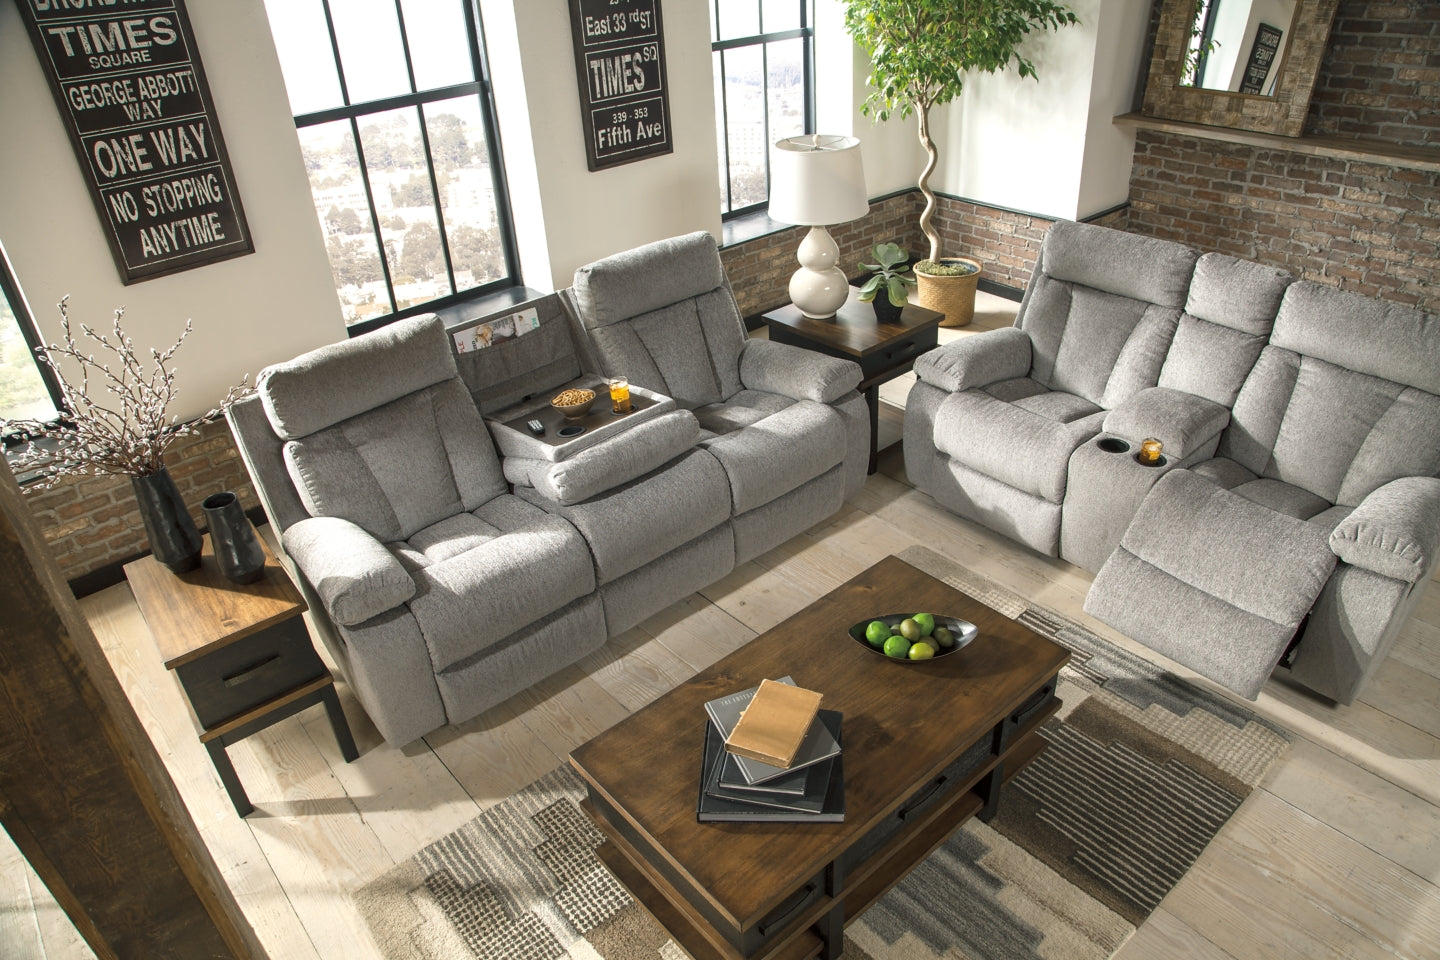 Mitchiner Reclining Sofa with Drop Down Table - furniture place usa